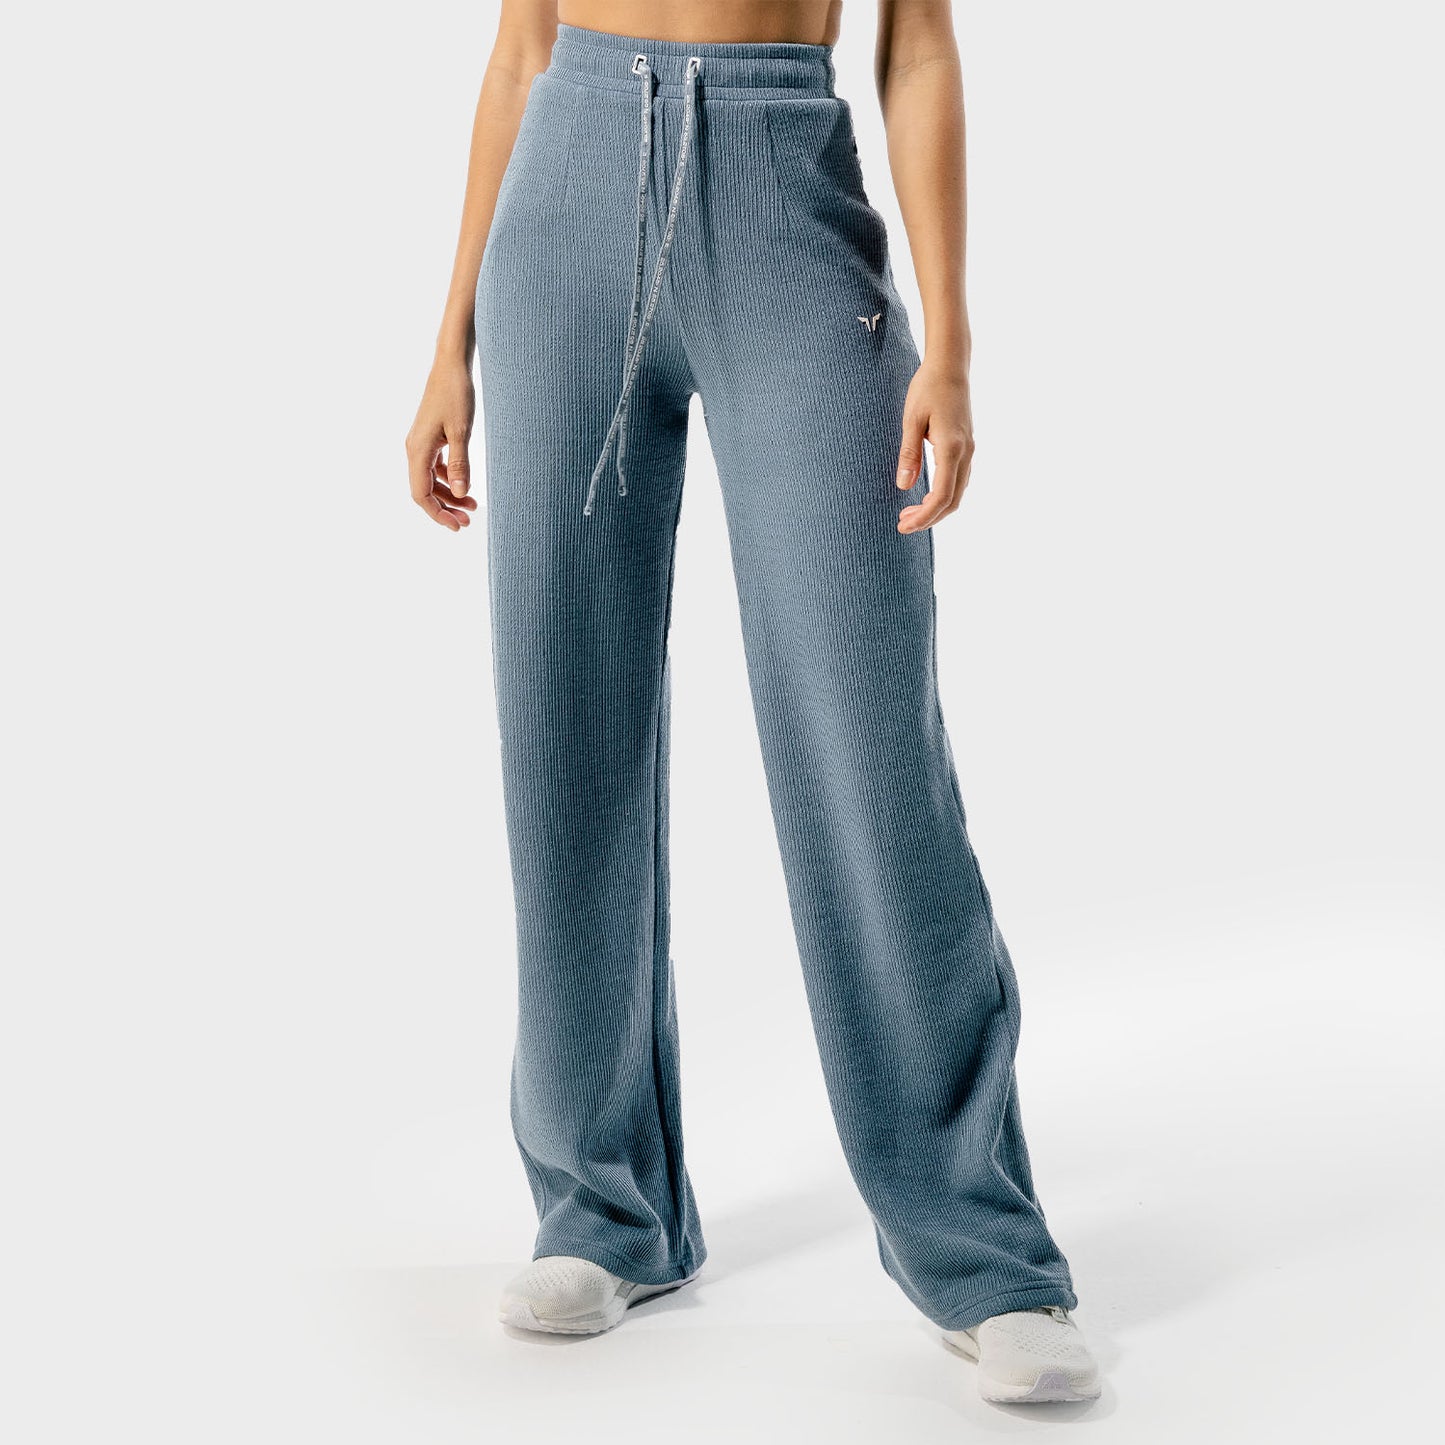 squatwolf-gym-pants-for-women-luxe-wide-leg-pants-baby-blue-workout-clothes